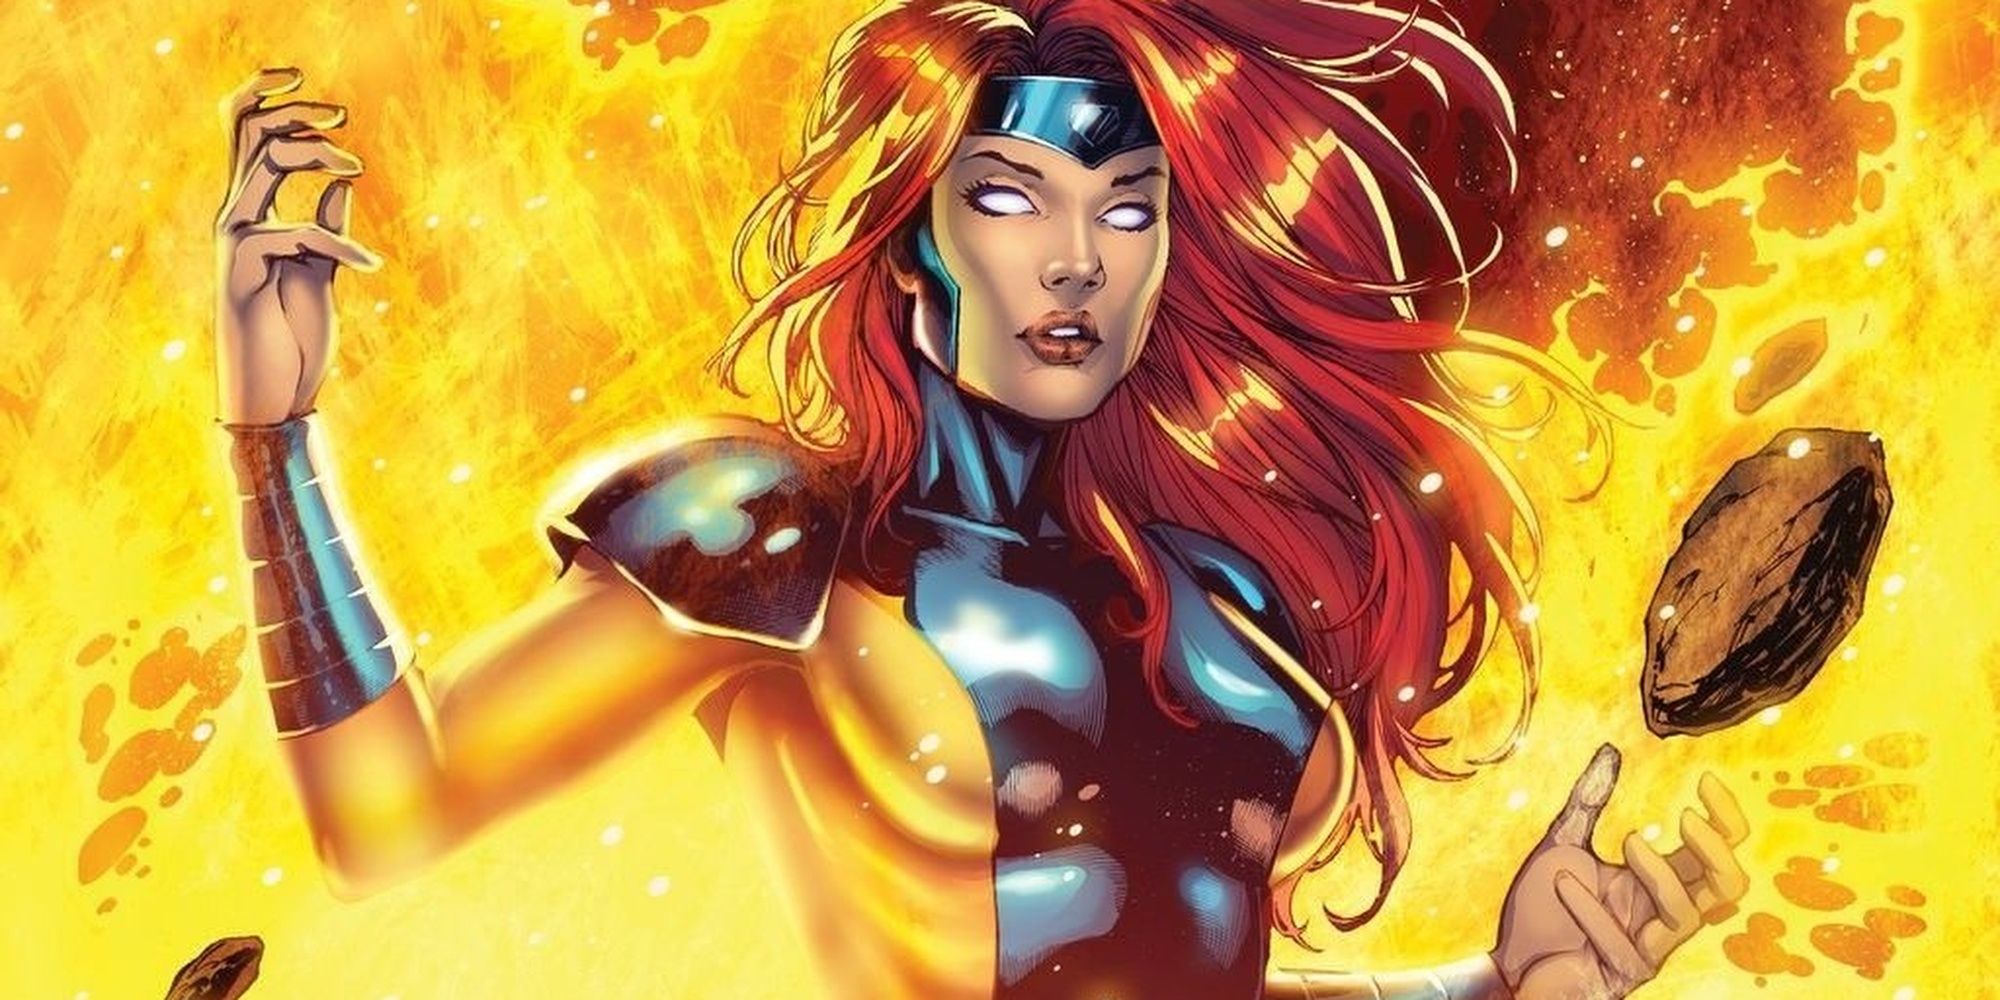 Jean Grey harnessing her mutant power and levitating a rock against a background of fire. 